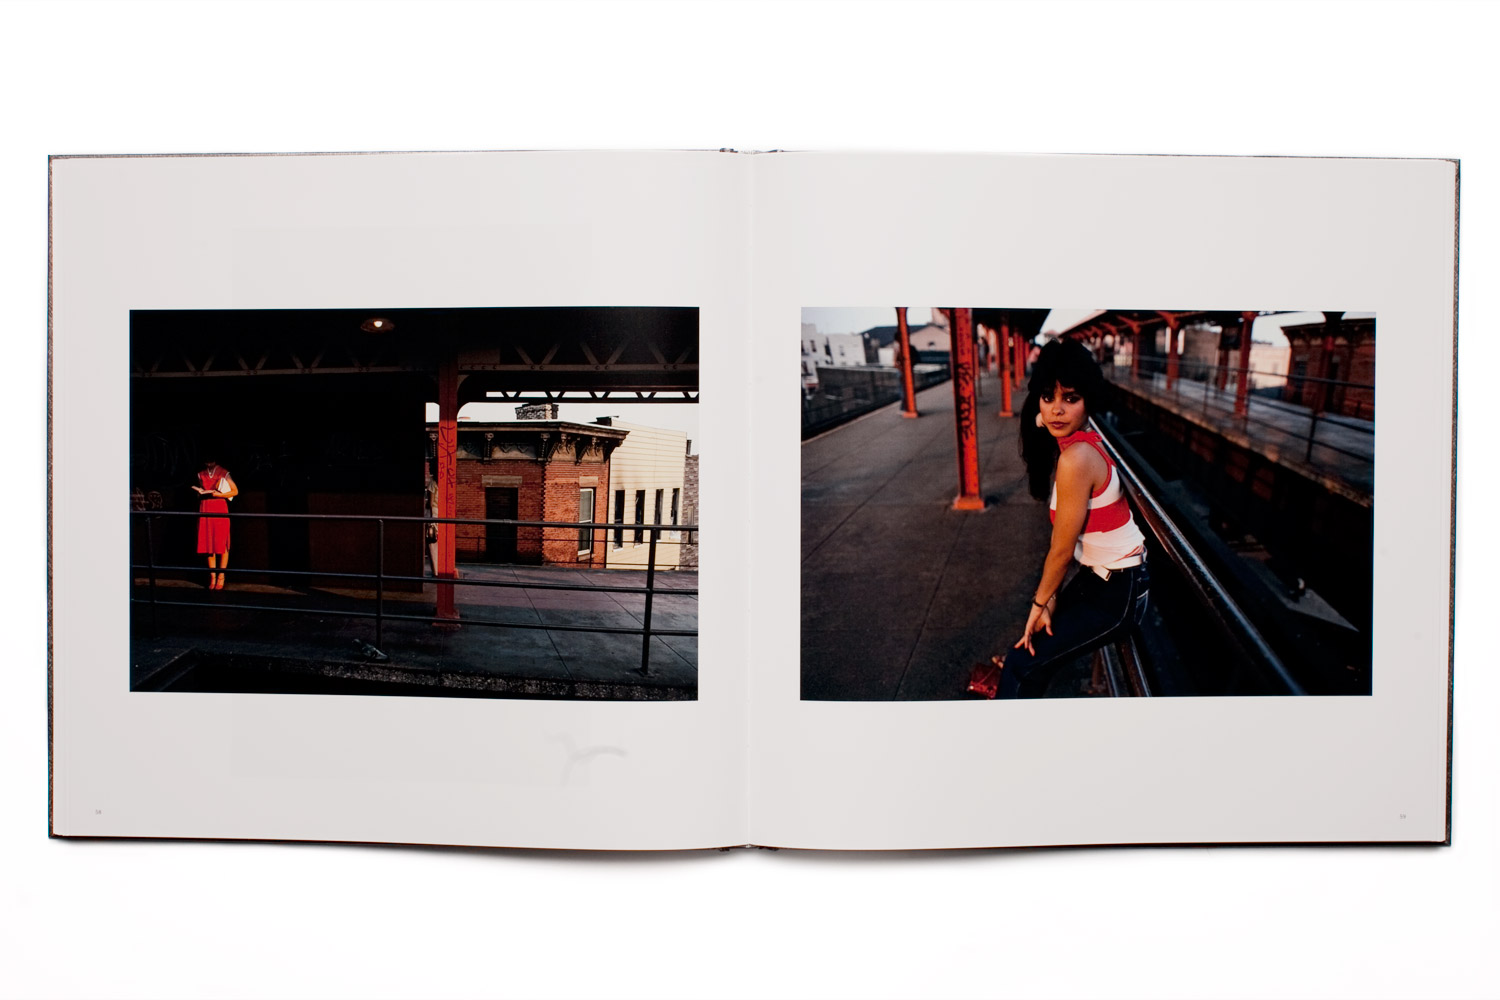 In Subway, the color red reoccurs frequently in the photographs. The more lyrical pairing of images throughout the book include those where images echo the same colors or shapes.